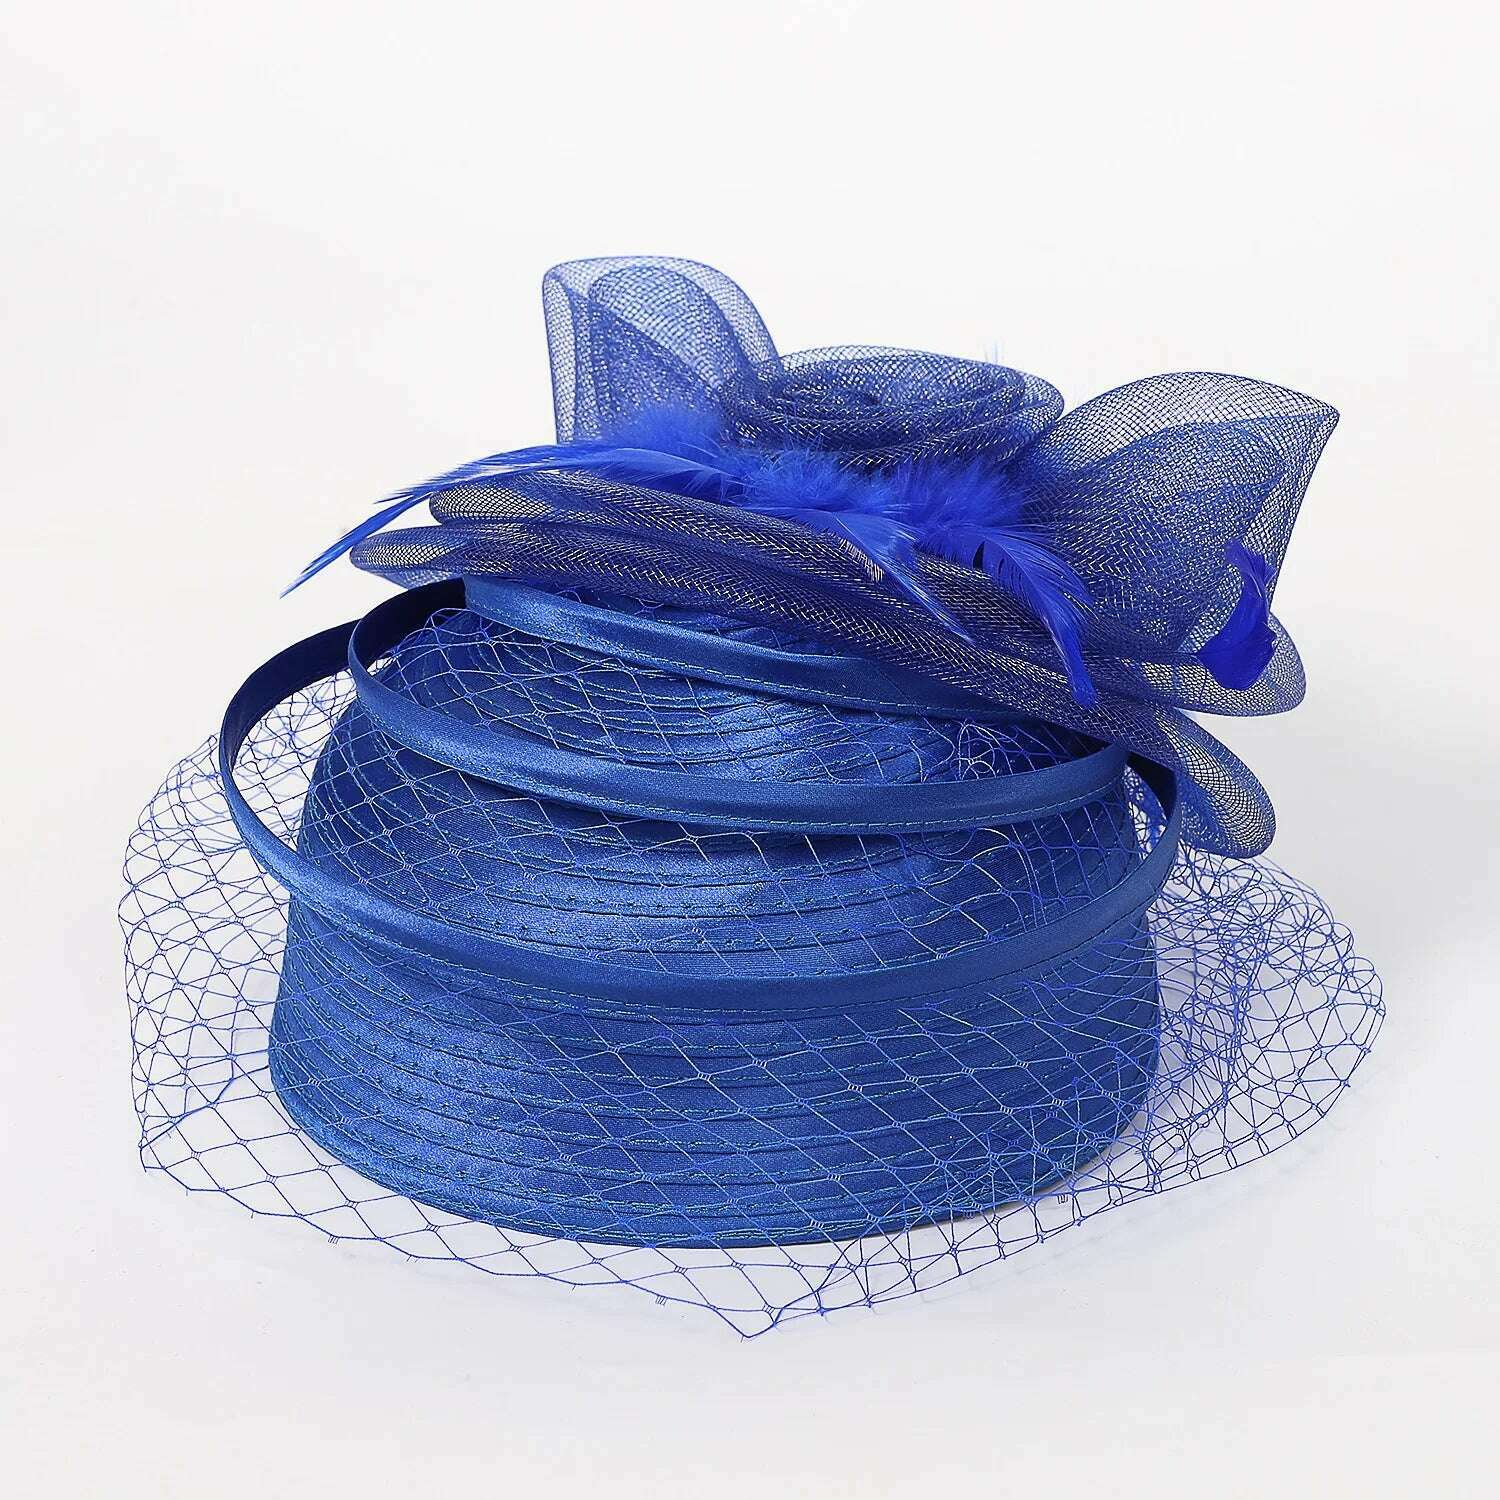 KIMLUD, FS 2023 Wedding Church Red Hats Fascinators For Woman With Feather Veil Cocktail Party Headdress Lady Elegant Kentucky Derby Cap, Royalblue / 54 to 56cm, KIMLUD Women's Clothes